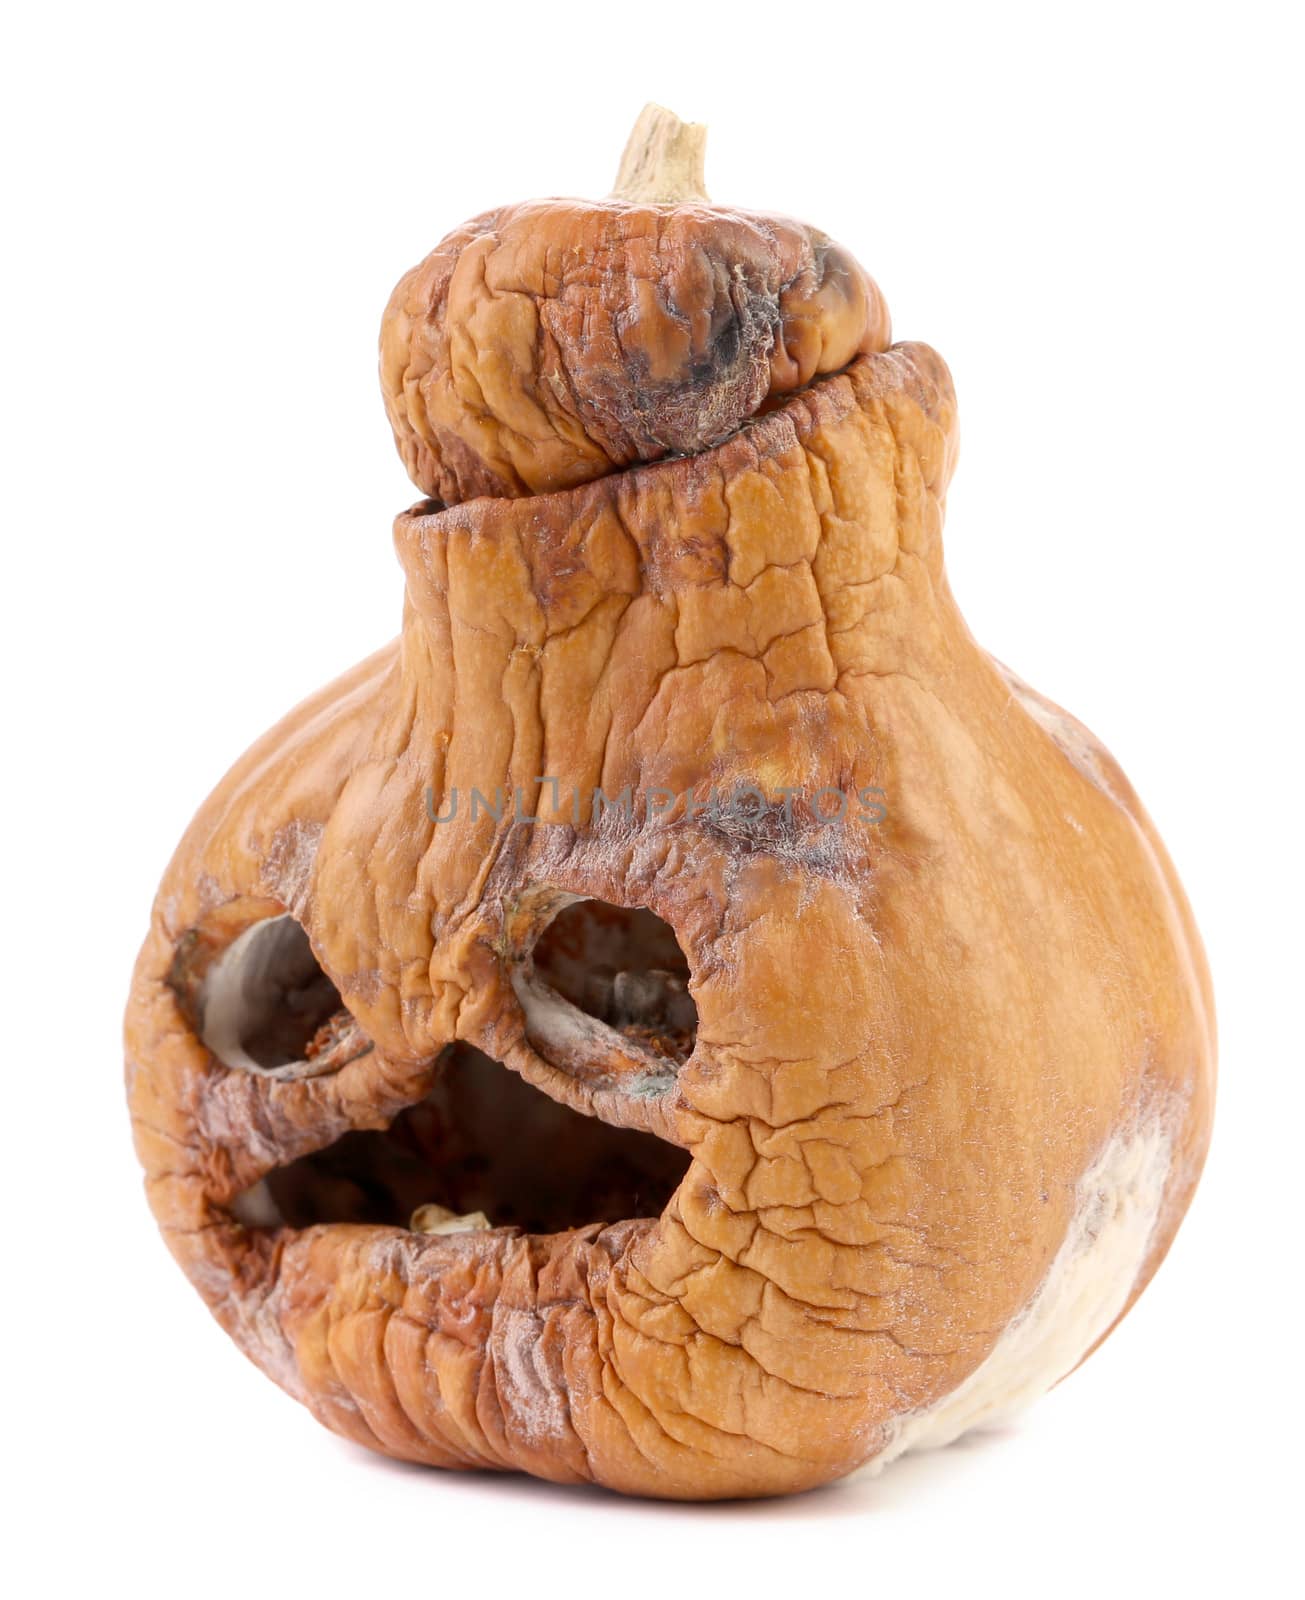 Old halloween pumpkin. Isolated on a white background.